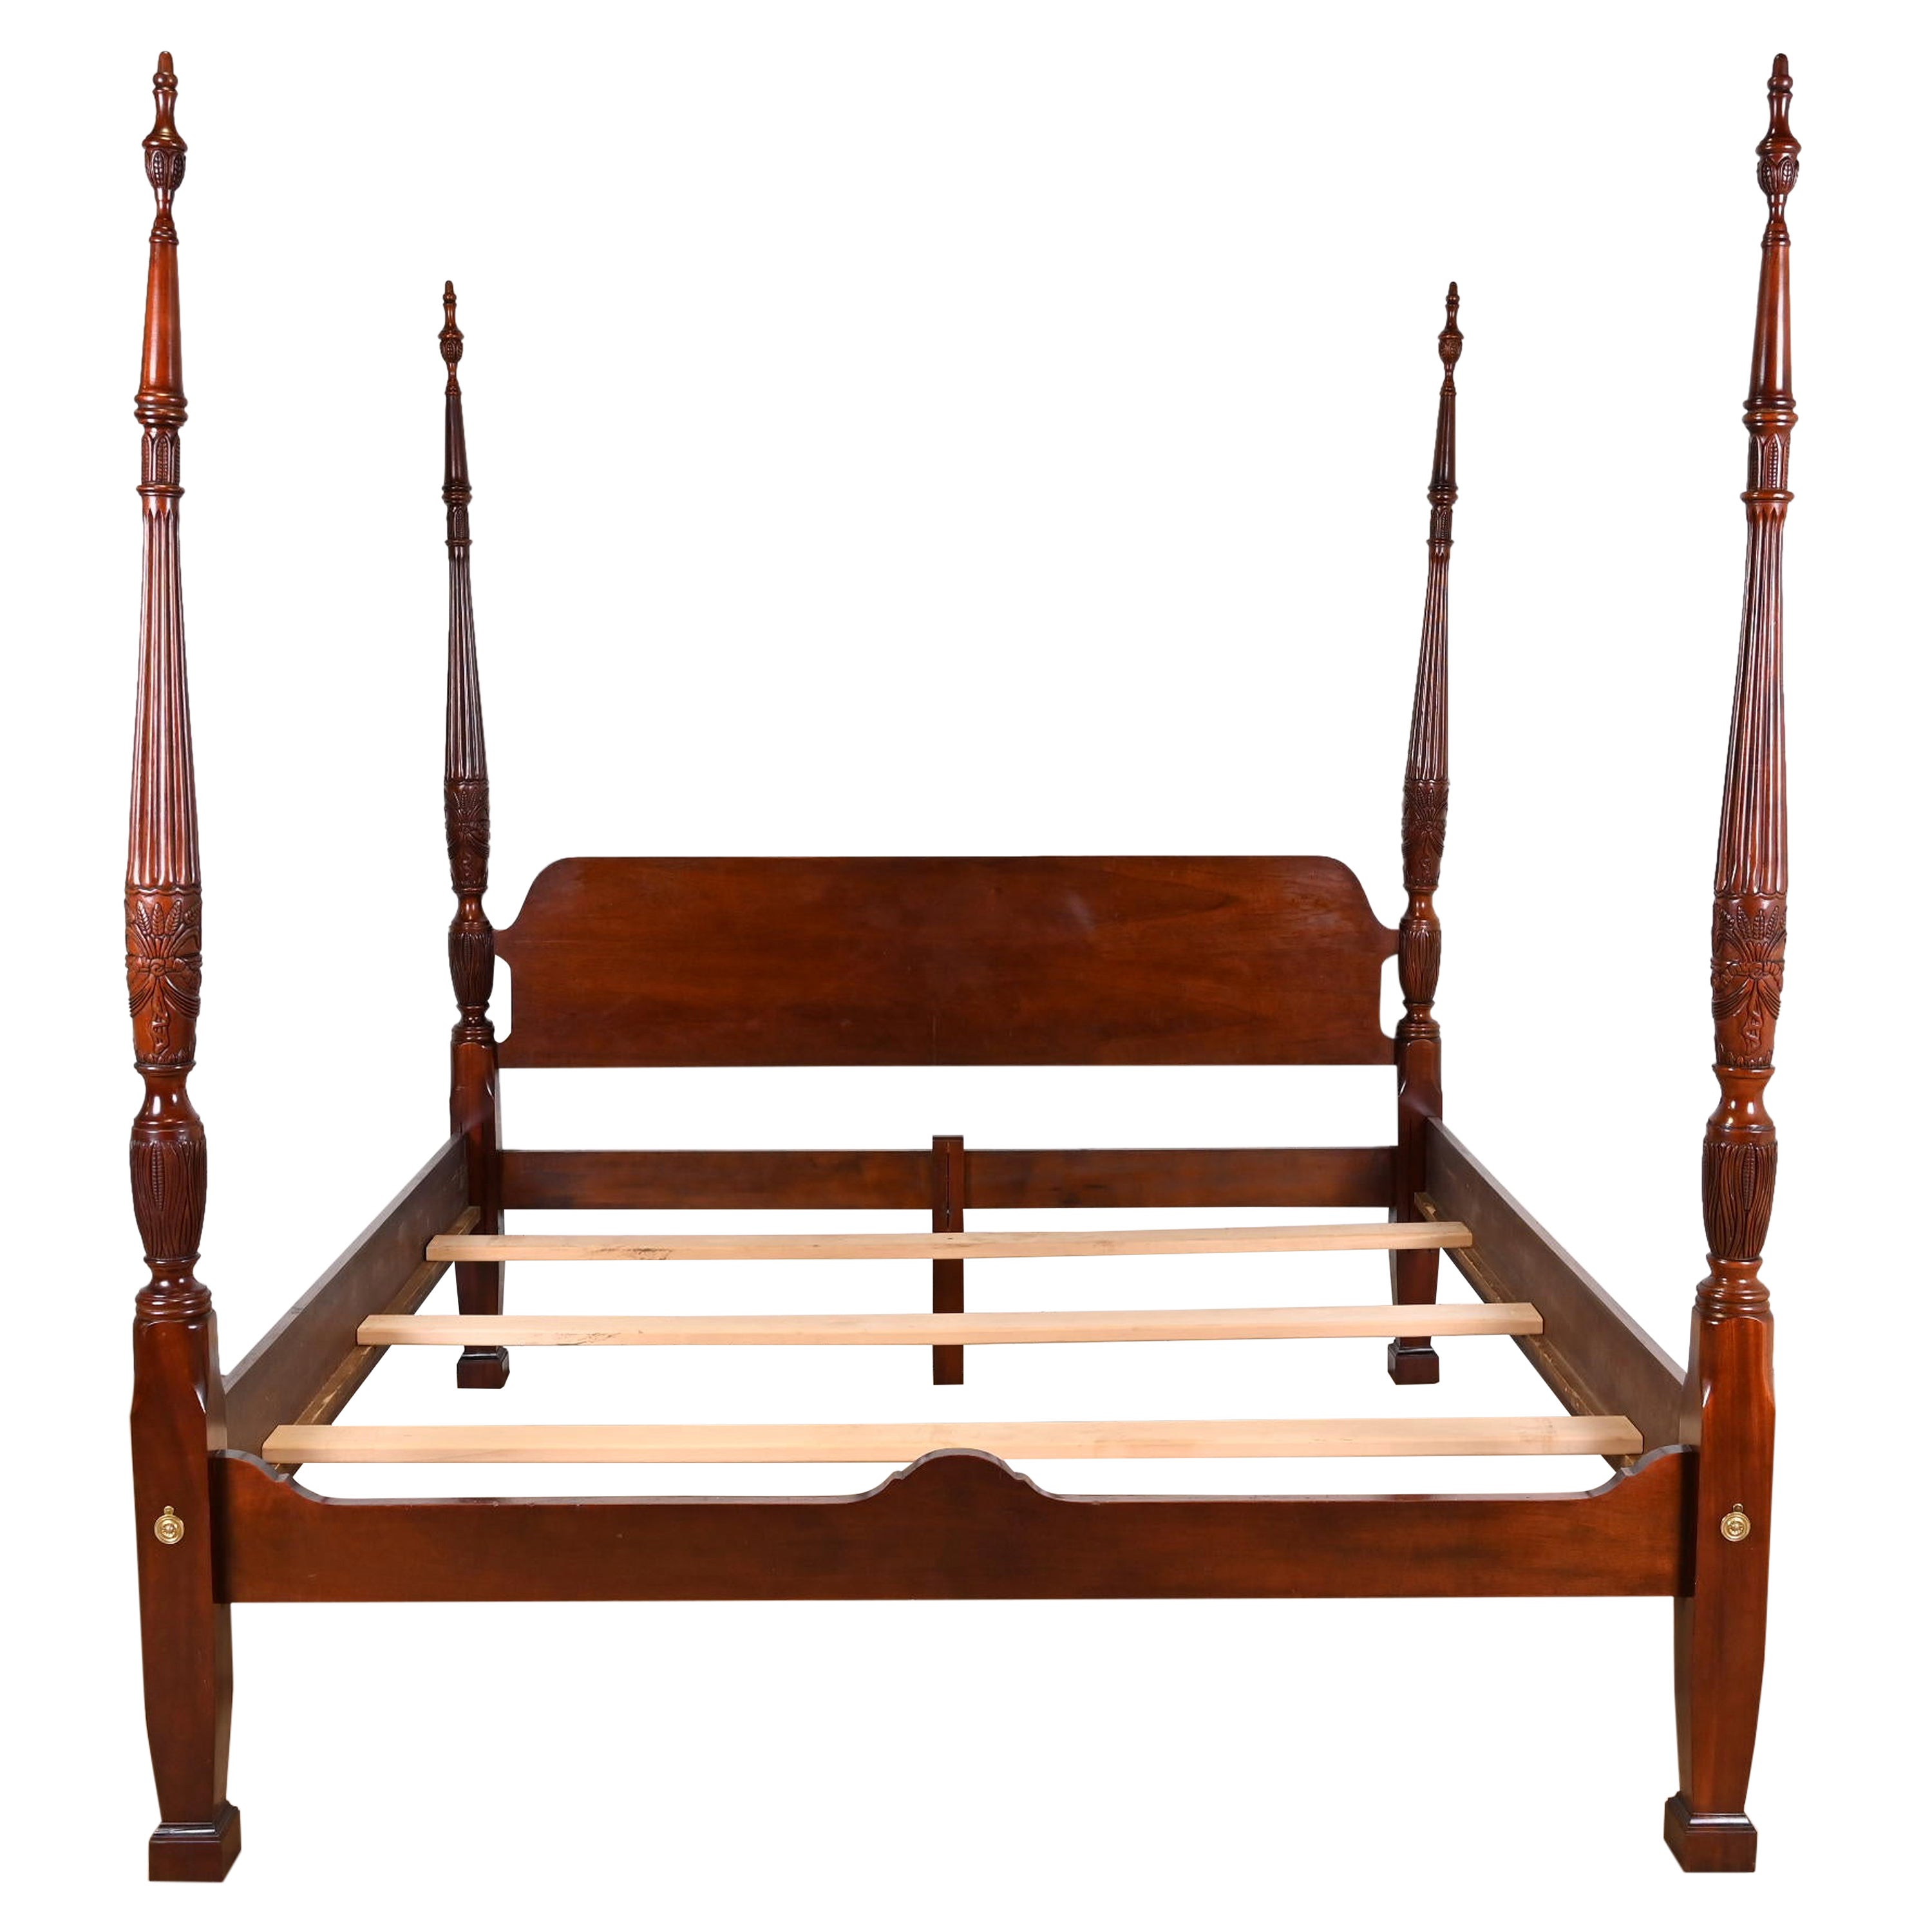 Thomasville Georgian Carved Mahogany King Size Poster Bed